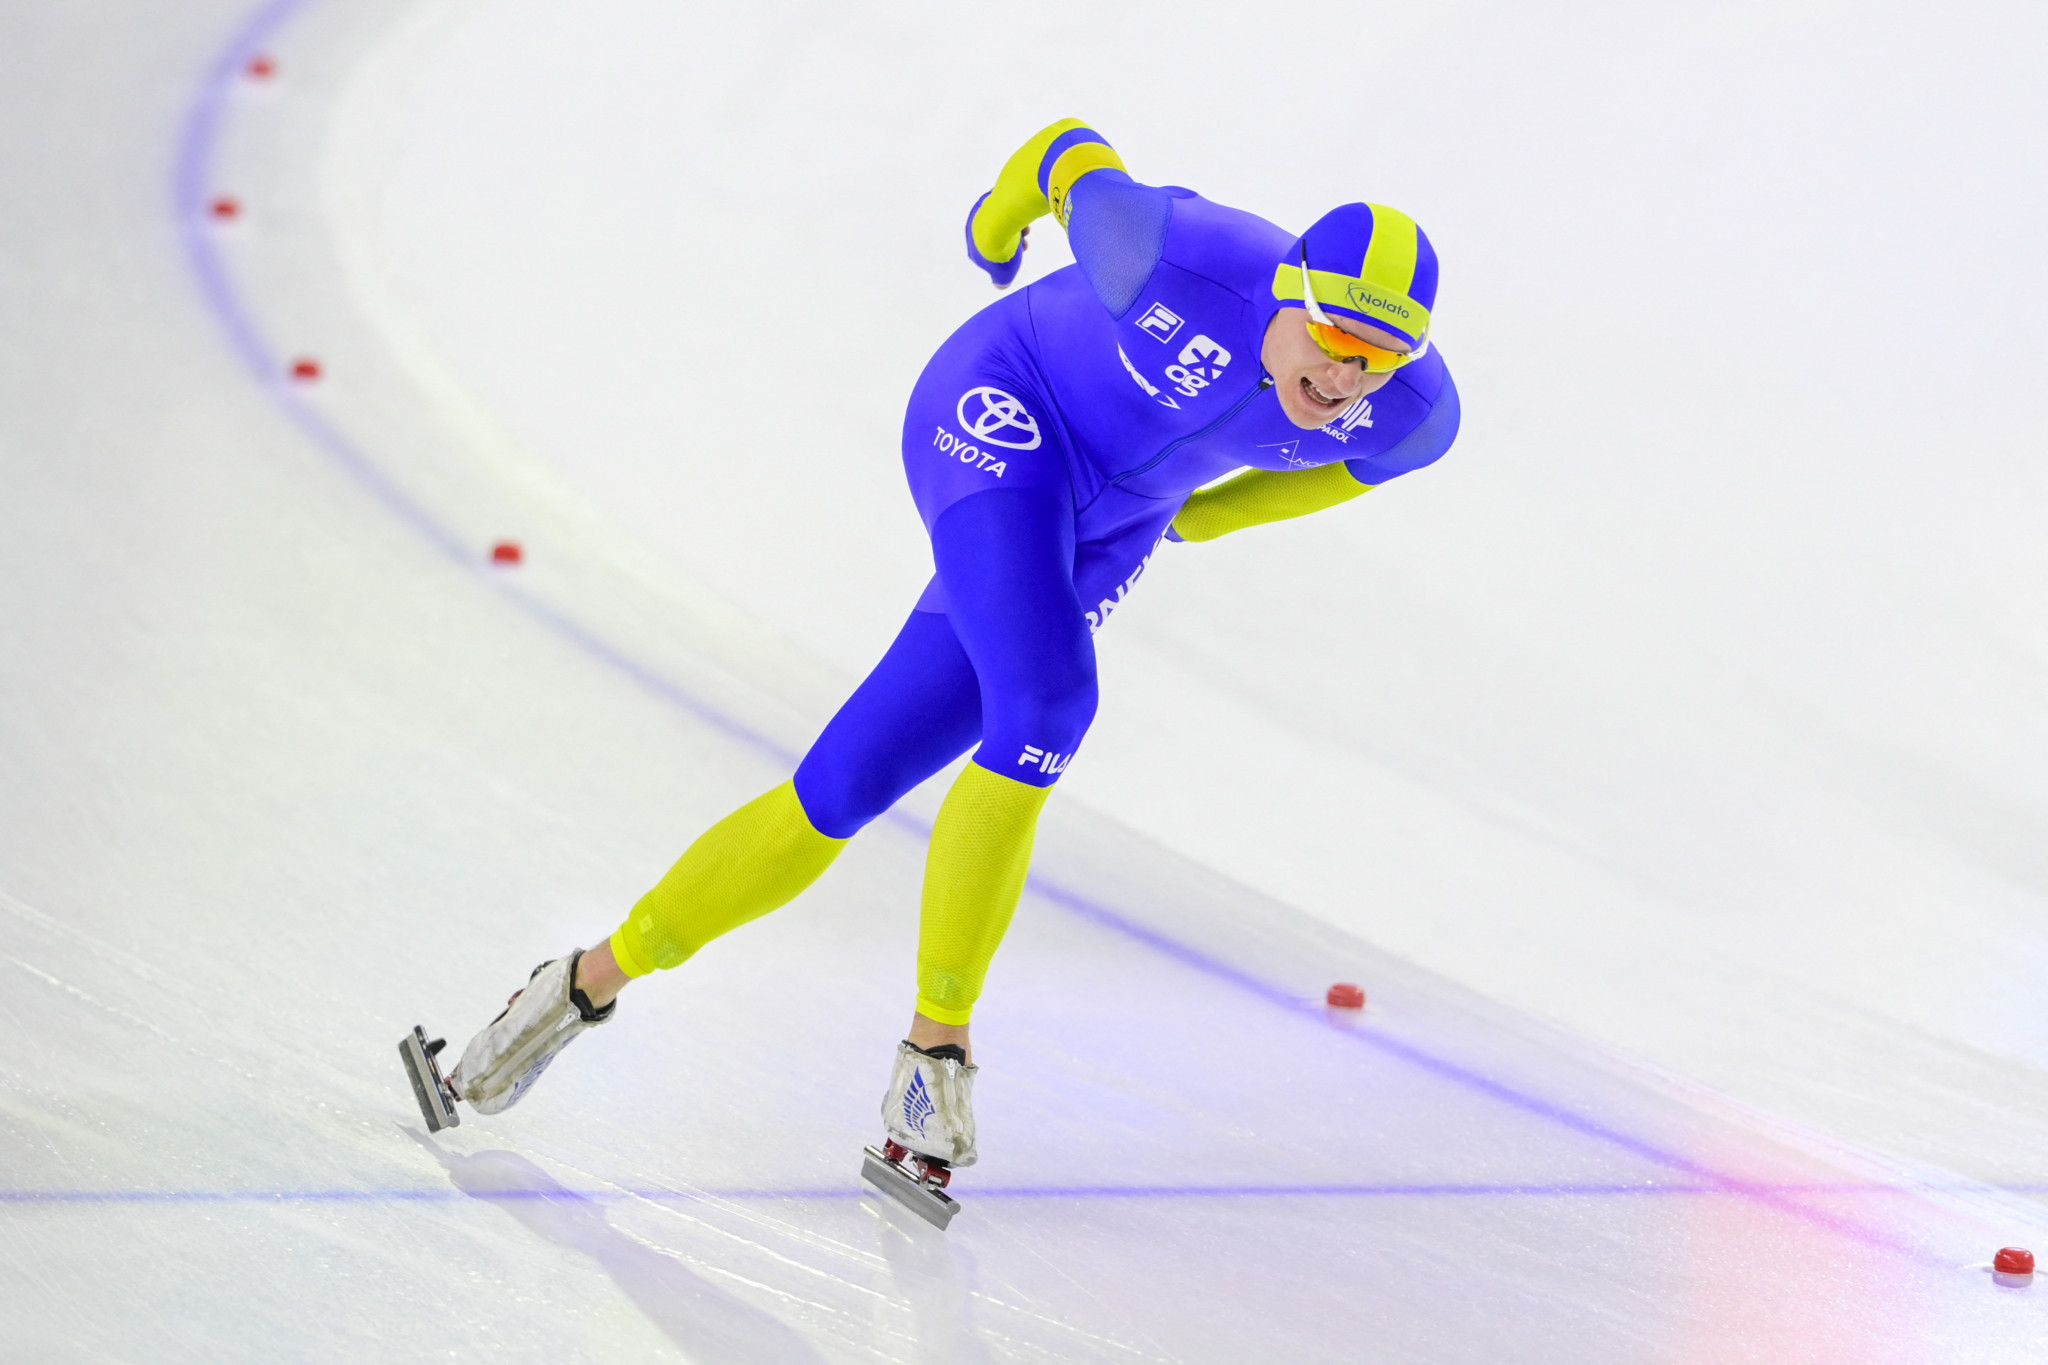 Sweden's Nils van der Poel ended his season and, potentially his career, in style with victory in the 5,000m at the ISU Speed Skating World Cup Final in Heerenveen©Getty Images